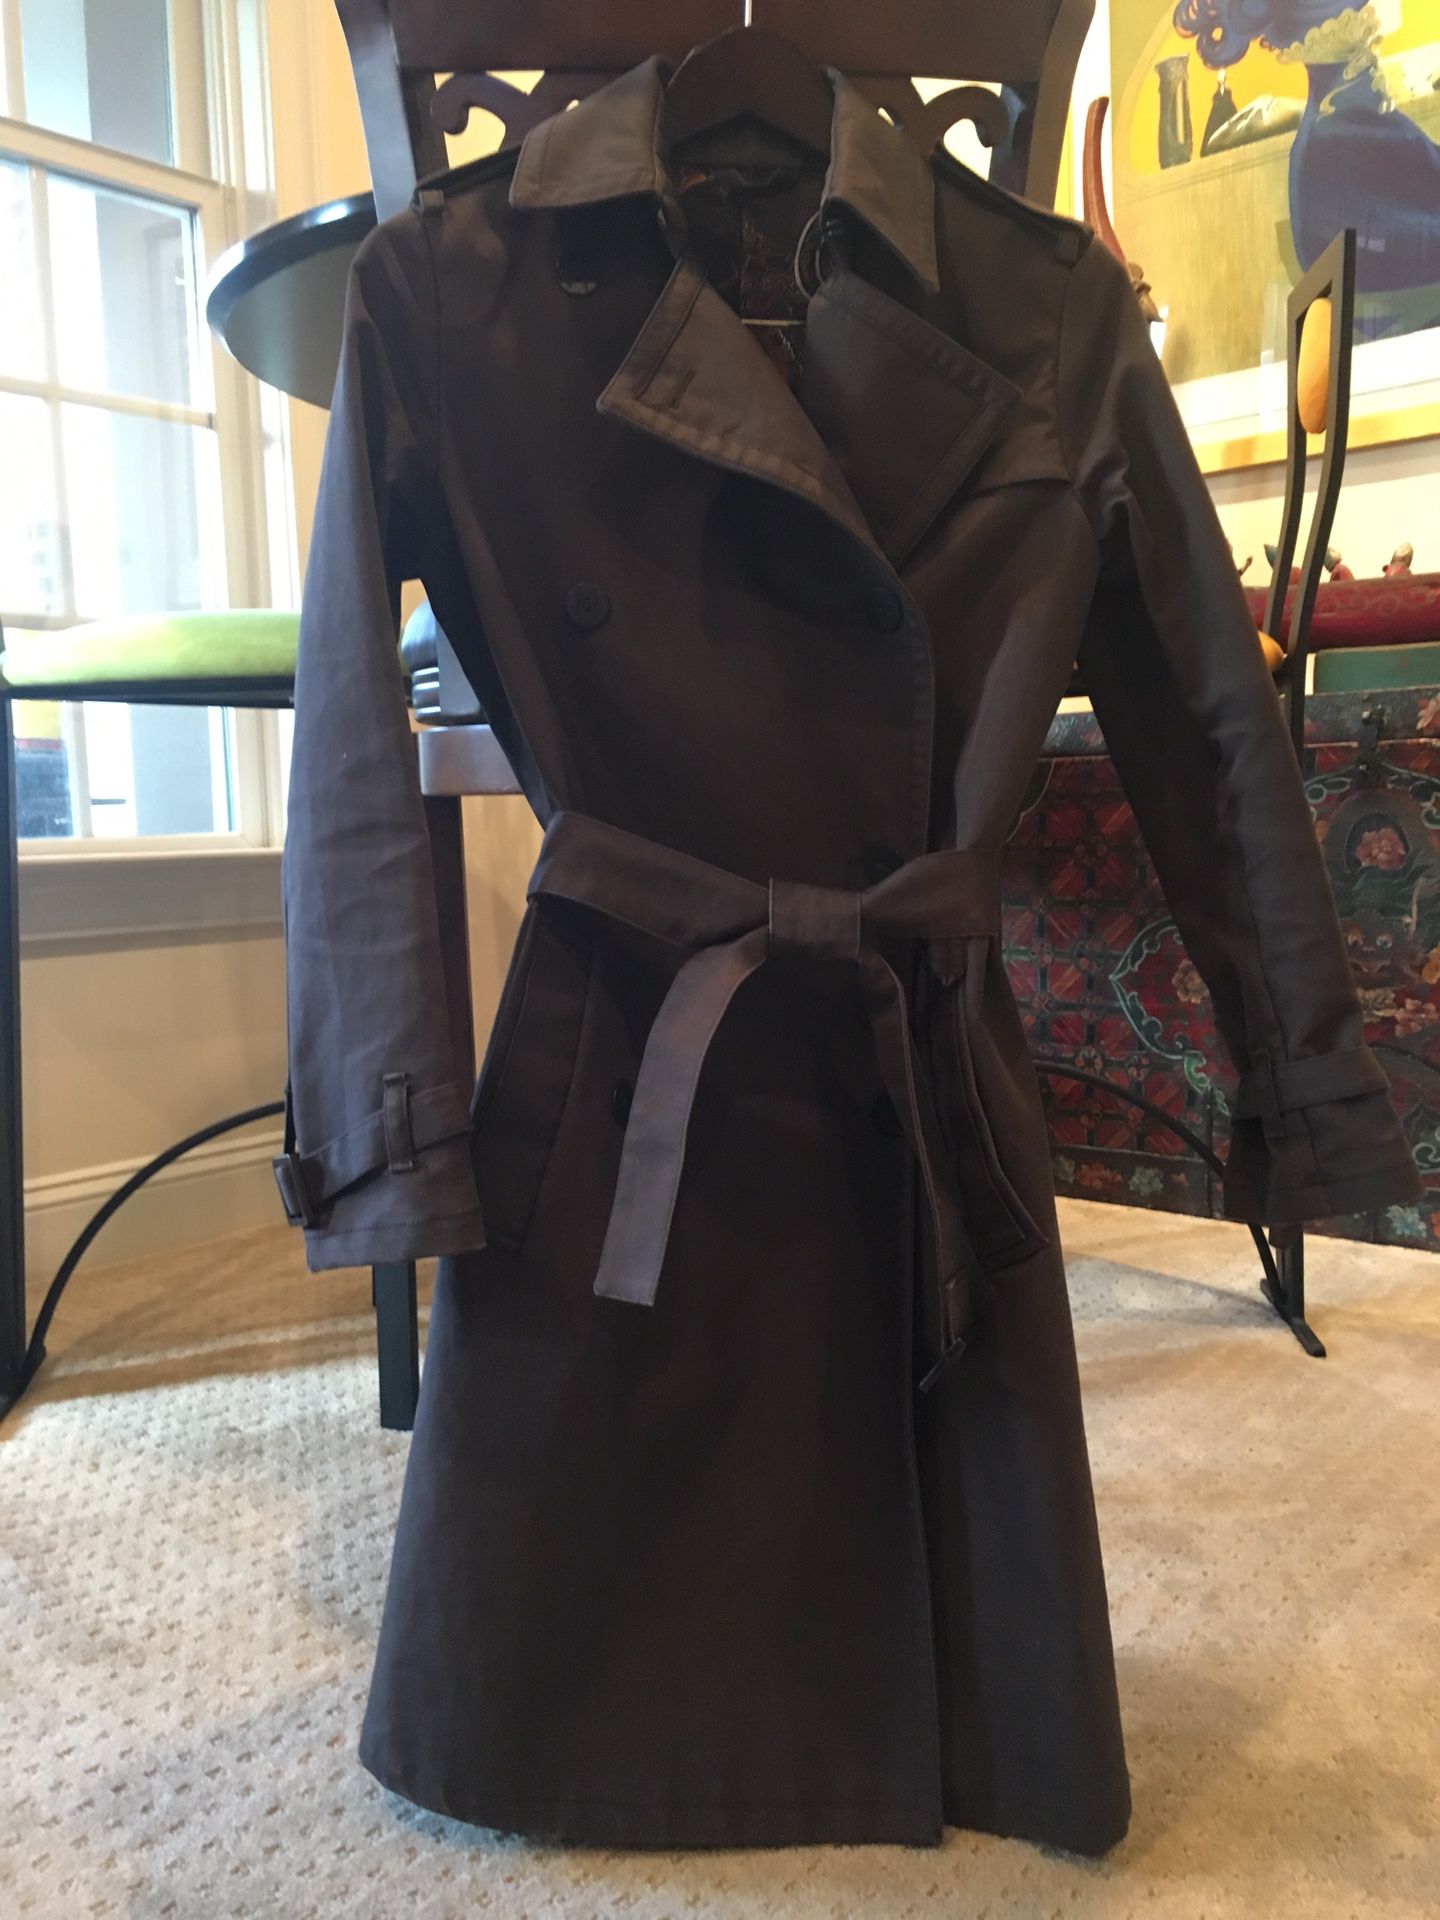 Burberry woman’s trench coat size 6 (rare)